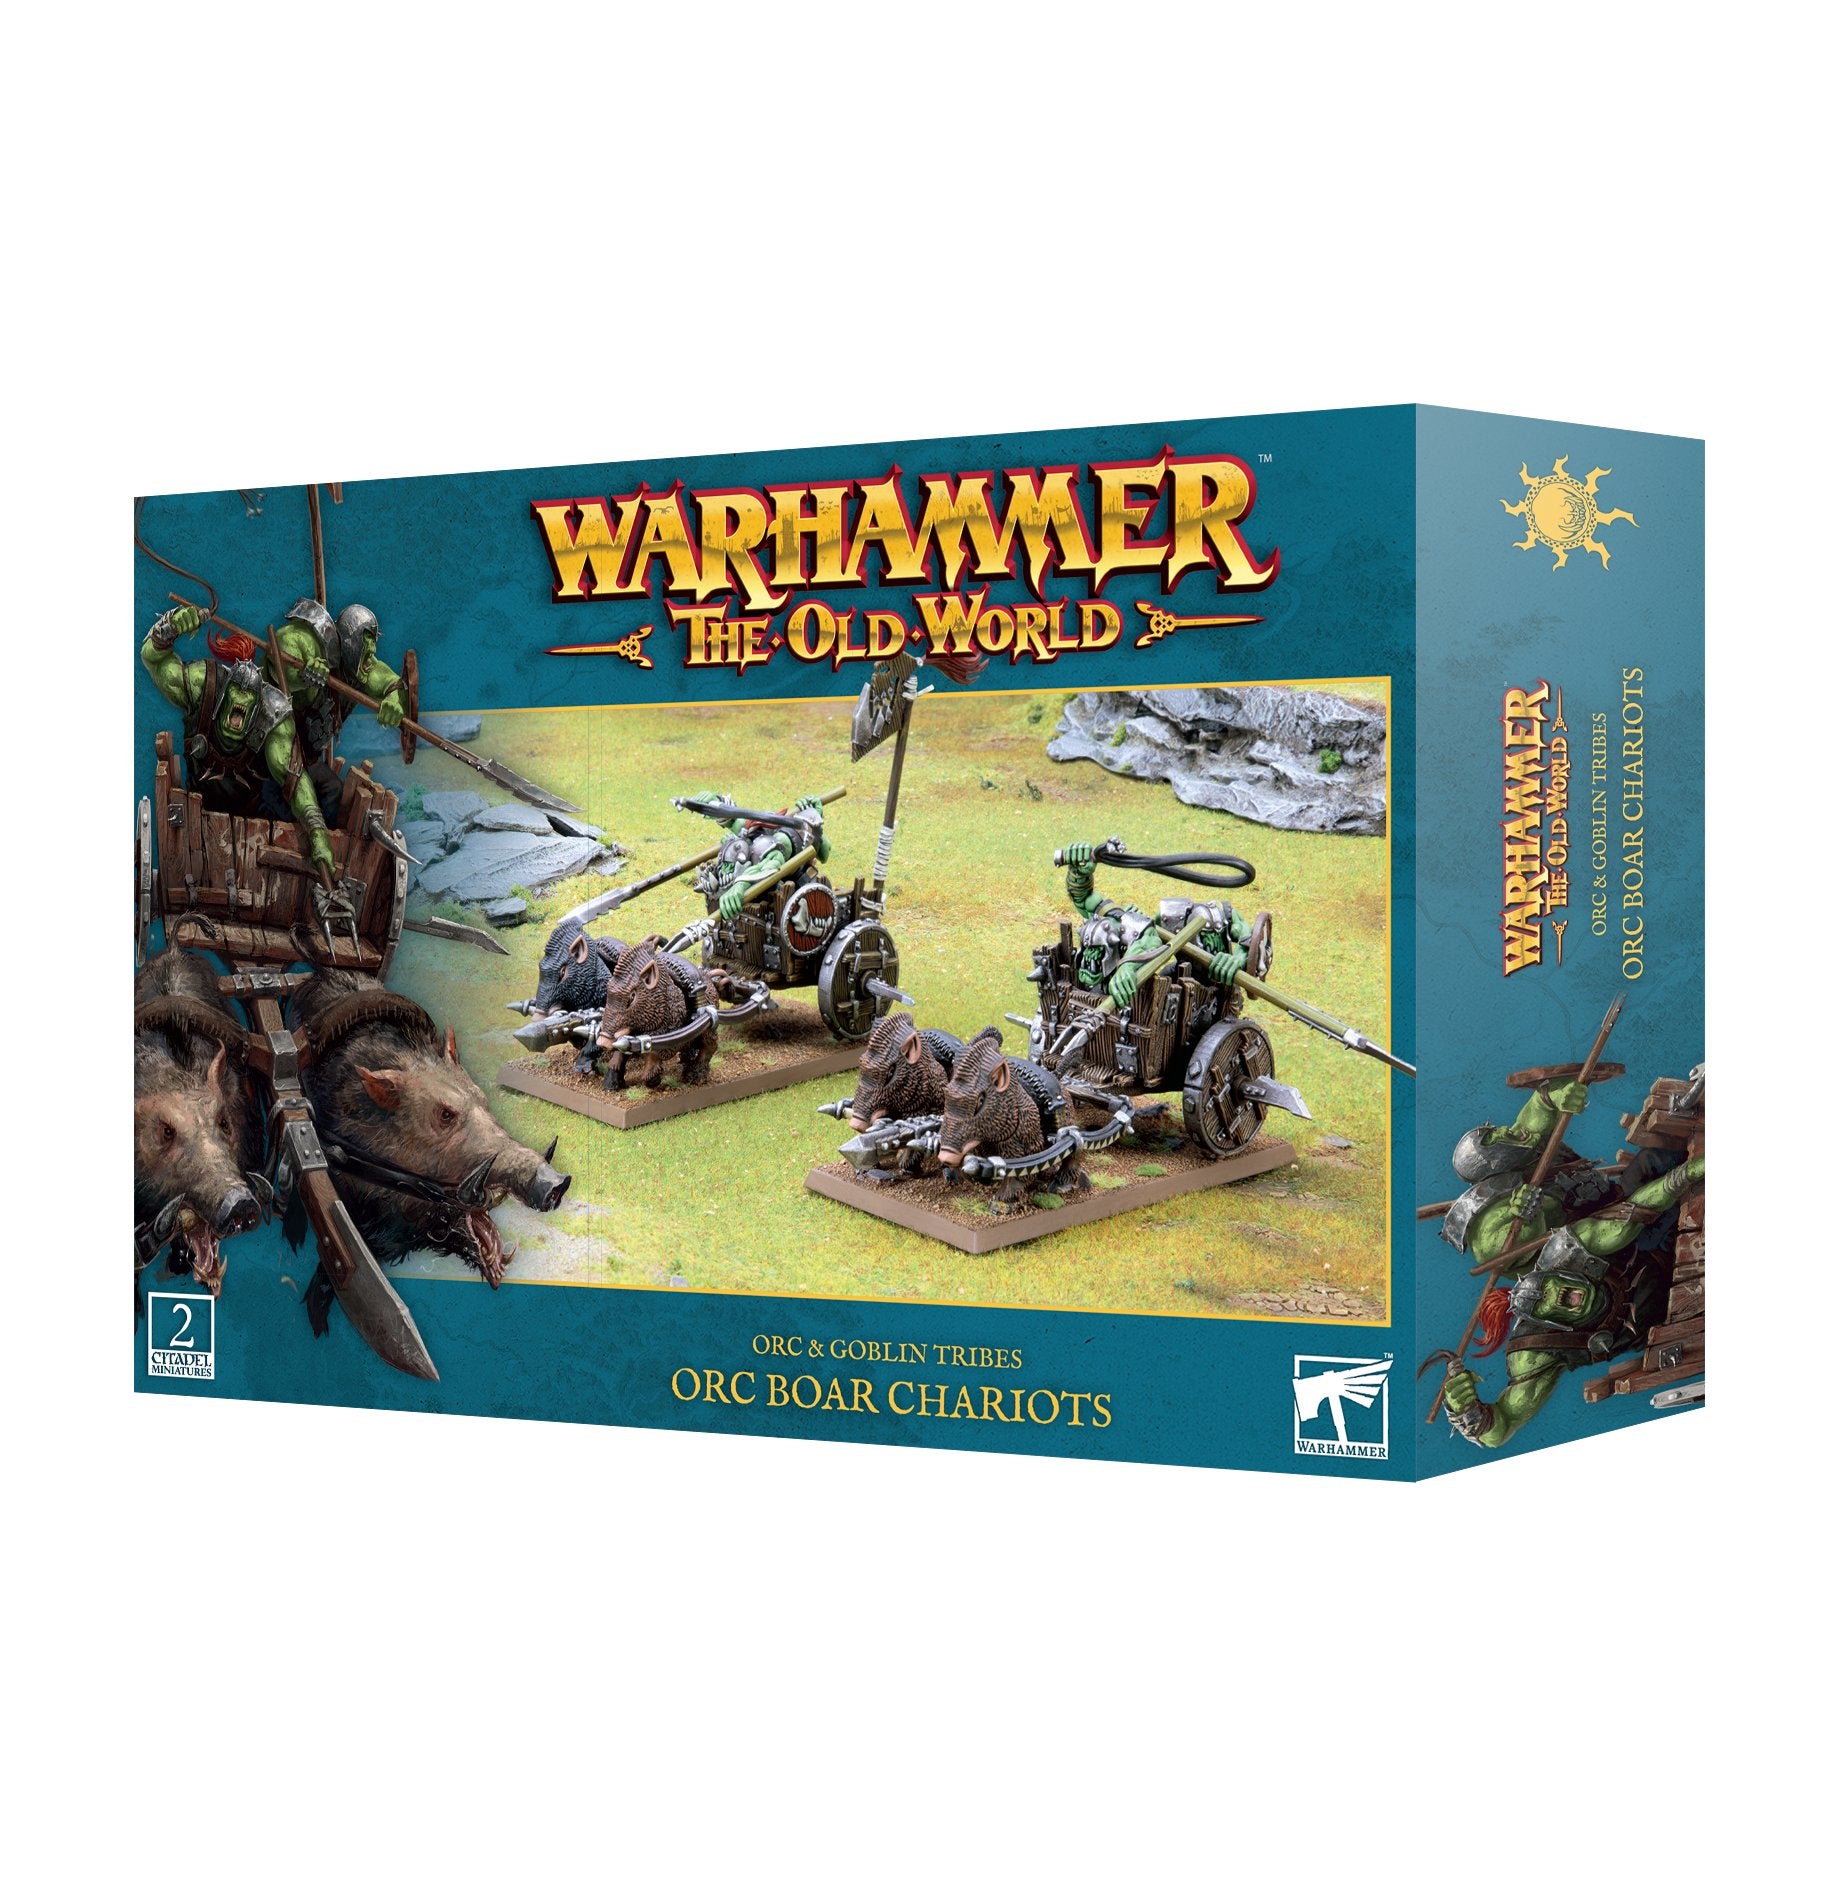 Orc & Goblin Tribes: Orc Boar Chariots - Release Date 4/5/24